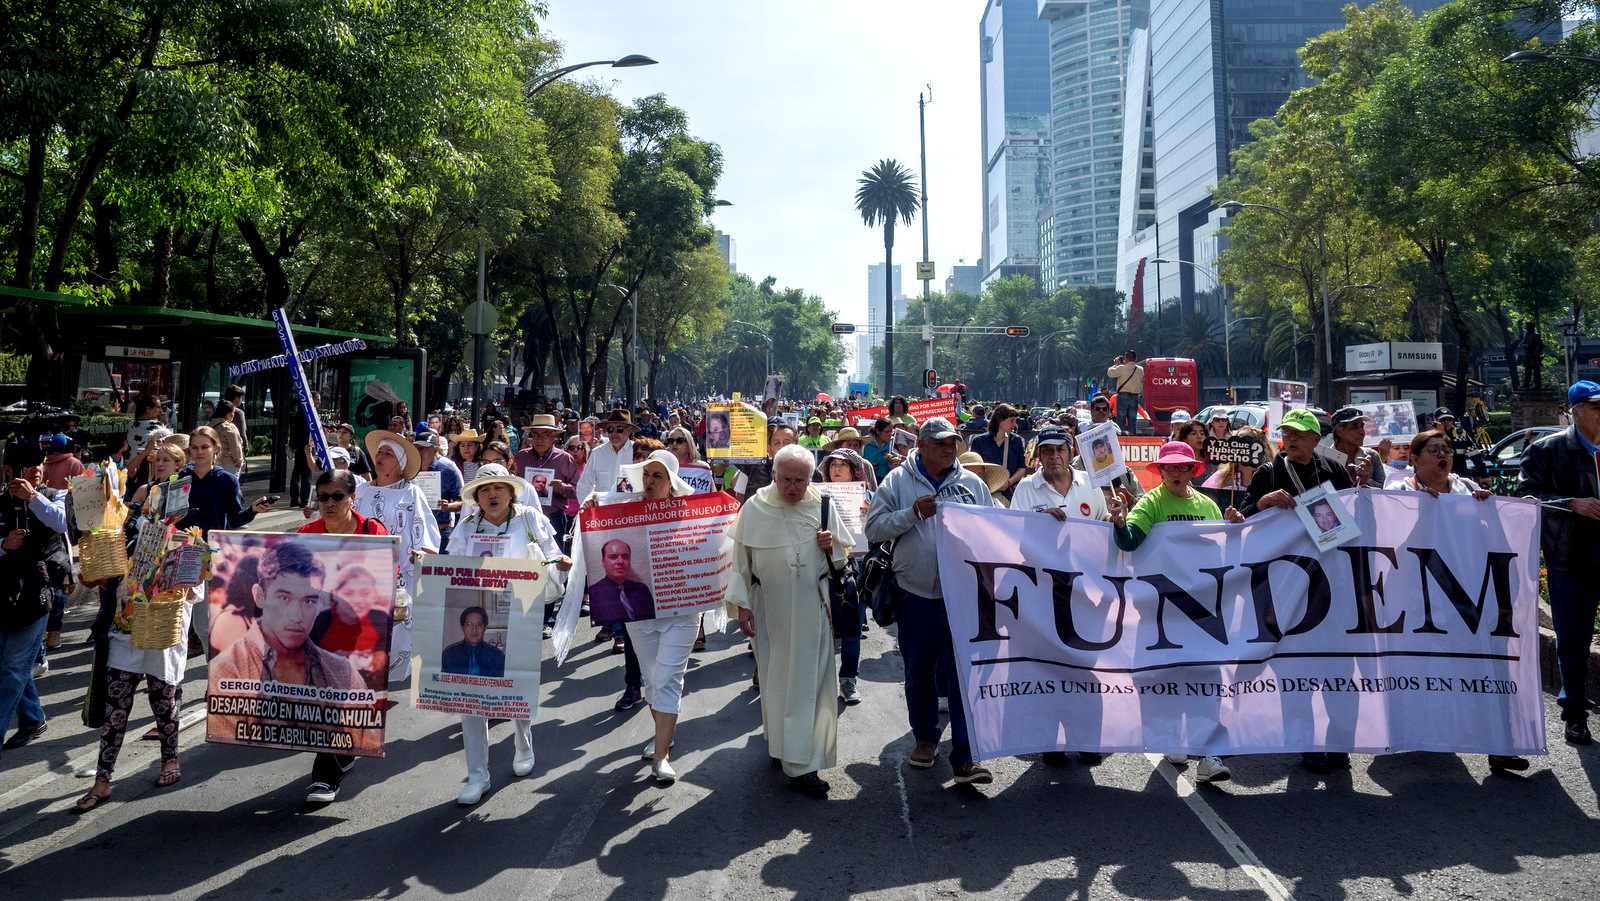 Thousands march along Paseo de la Reforma to demand justice for forcibly disappeared children, Mexico City, May 10, 2018. (Photo: José Luis Granados Ceja)